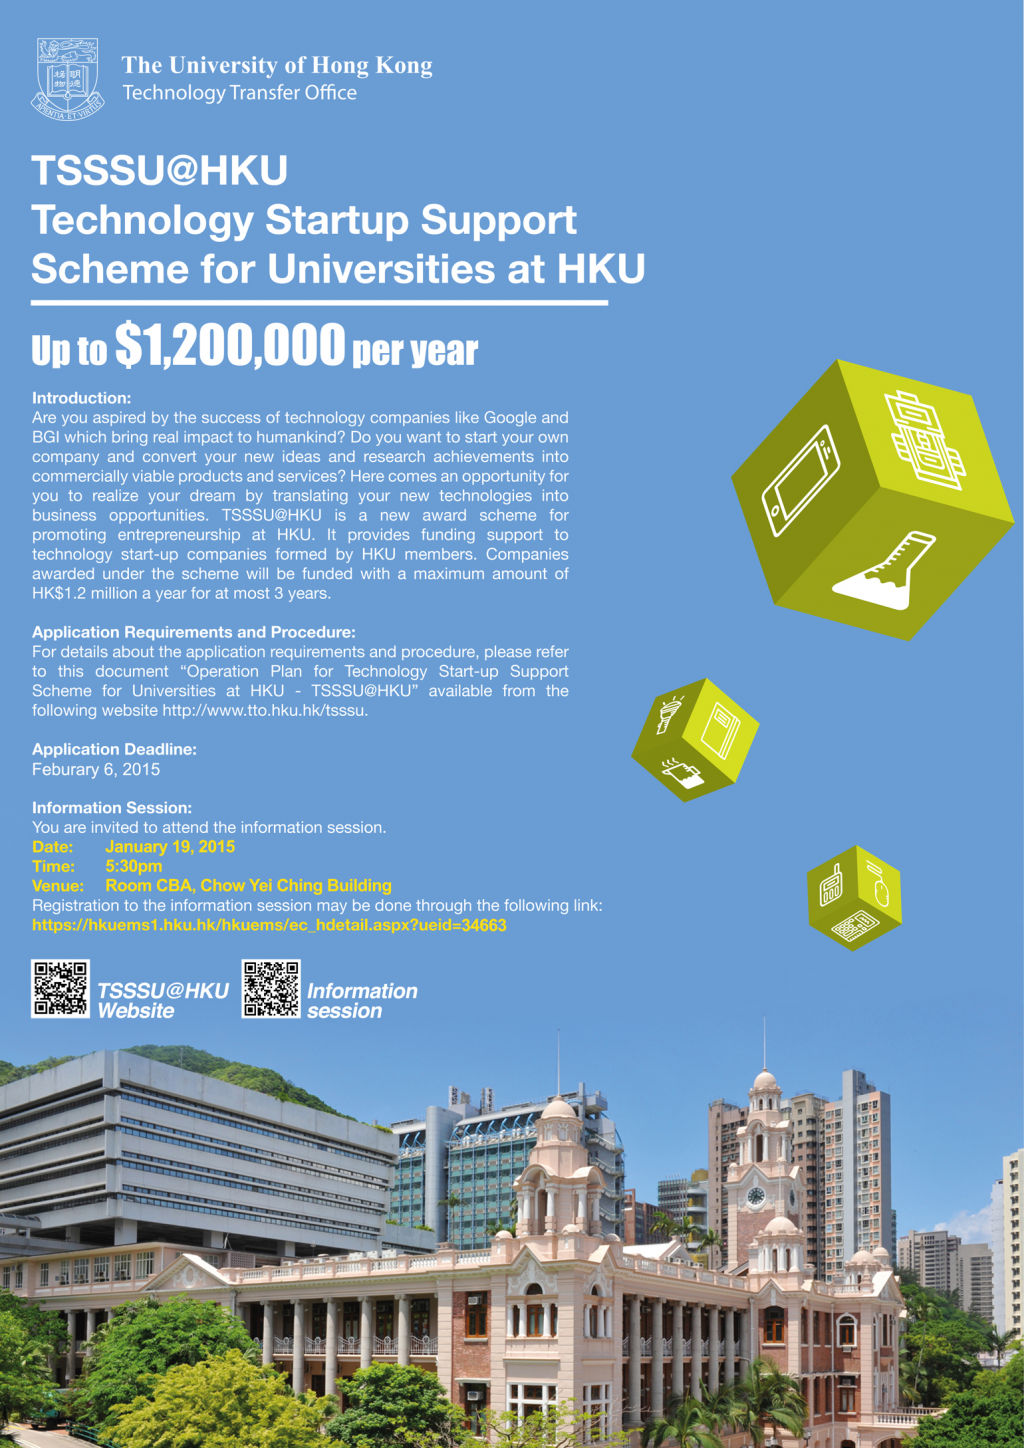 Call for application - Technology Start-up Support Scheme for Universities at HKU 2015